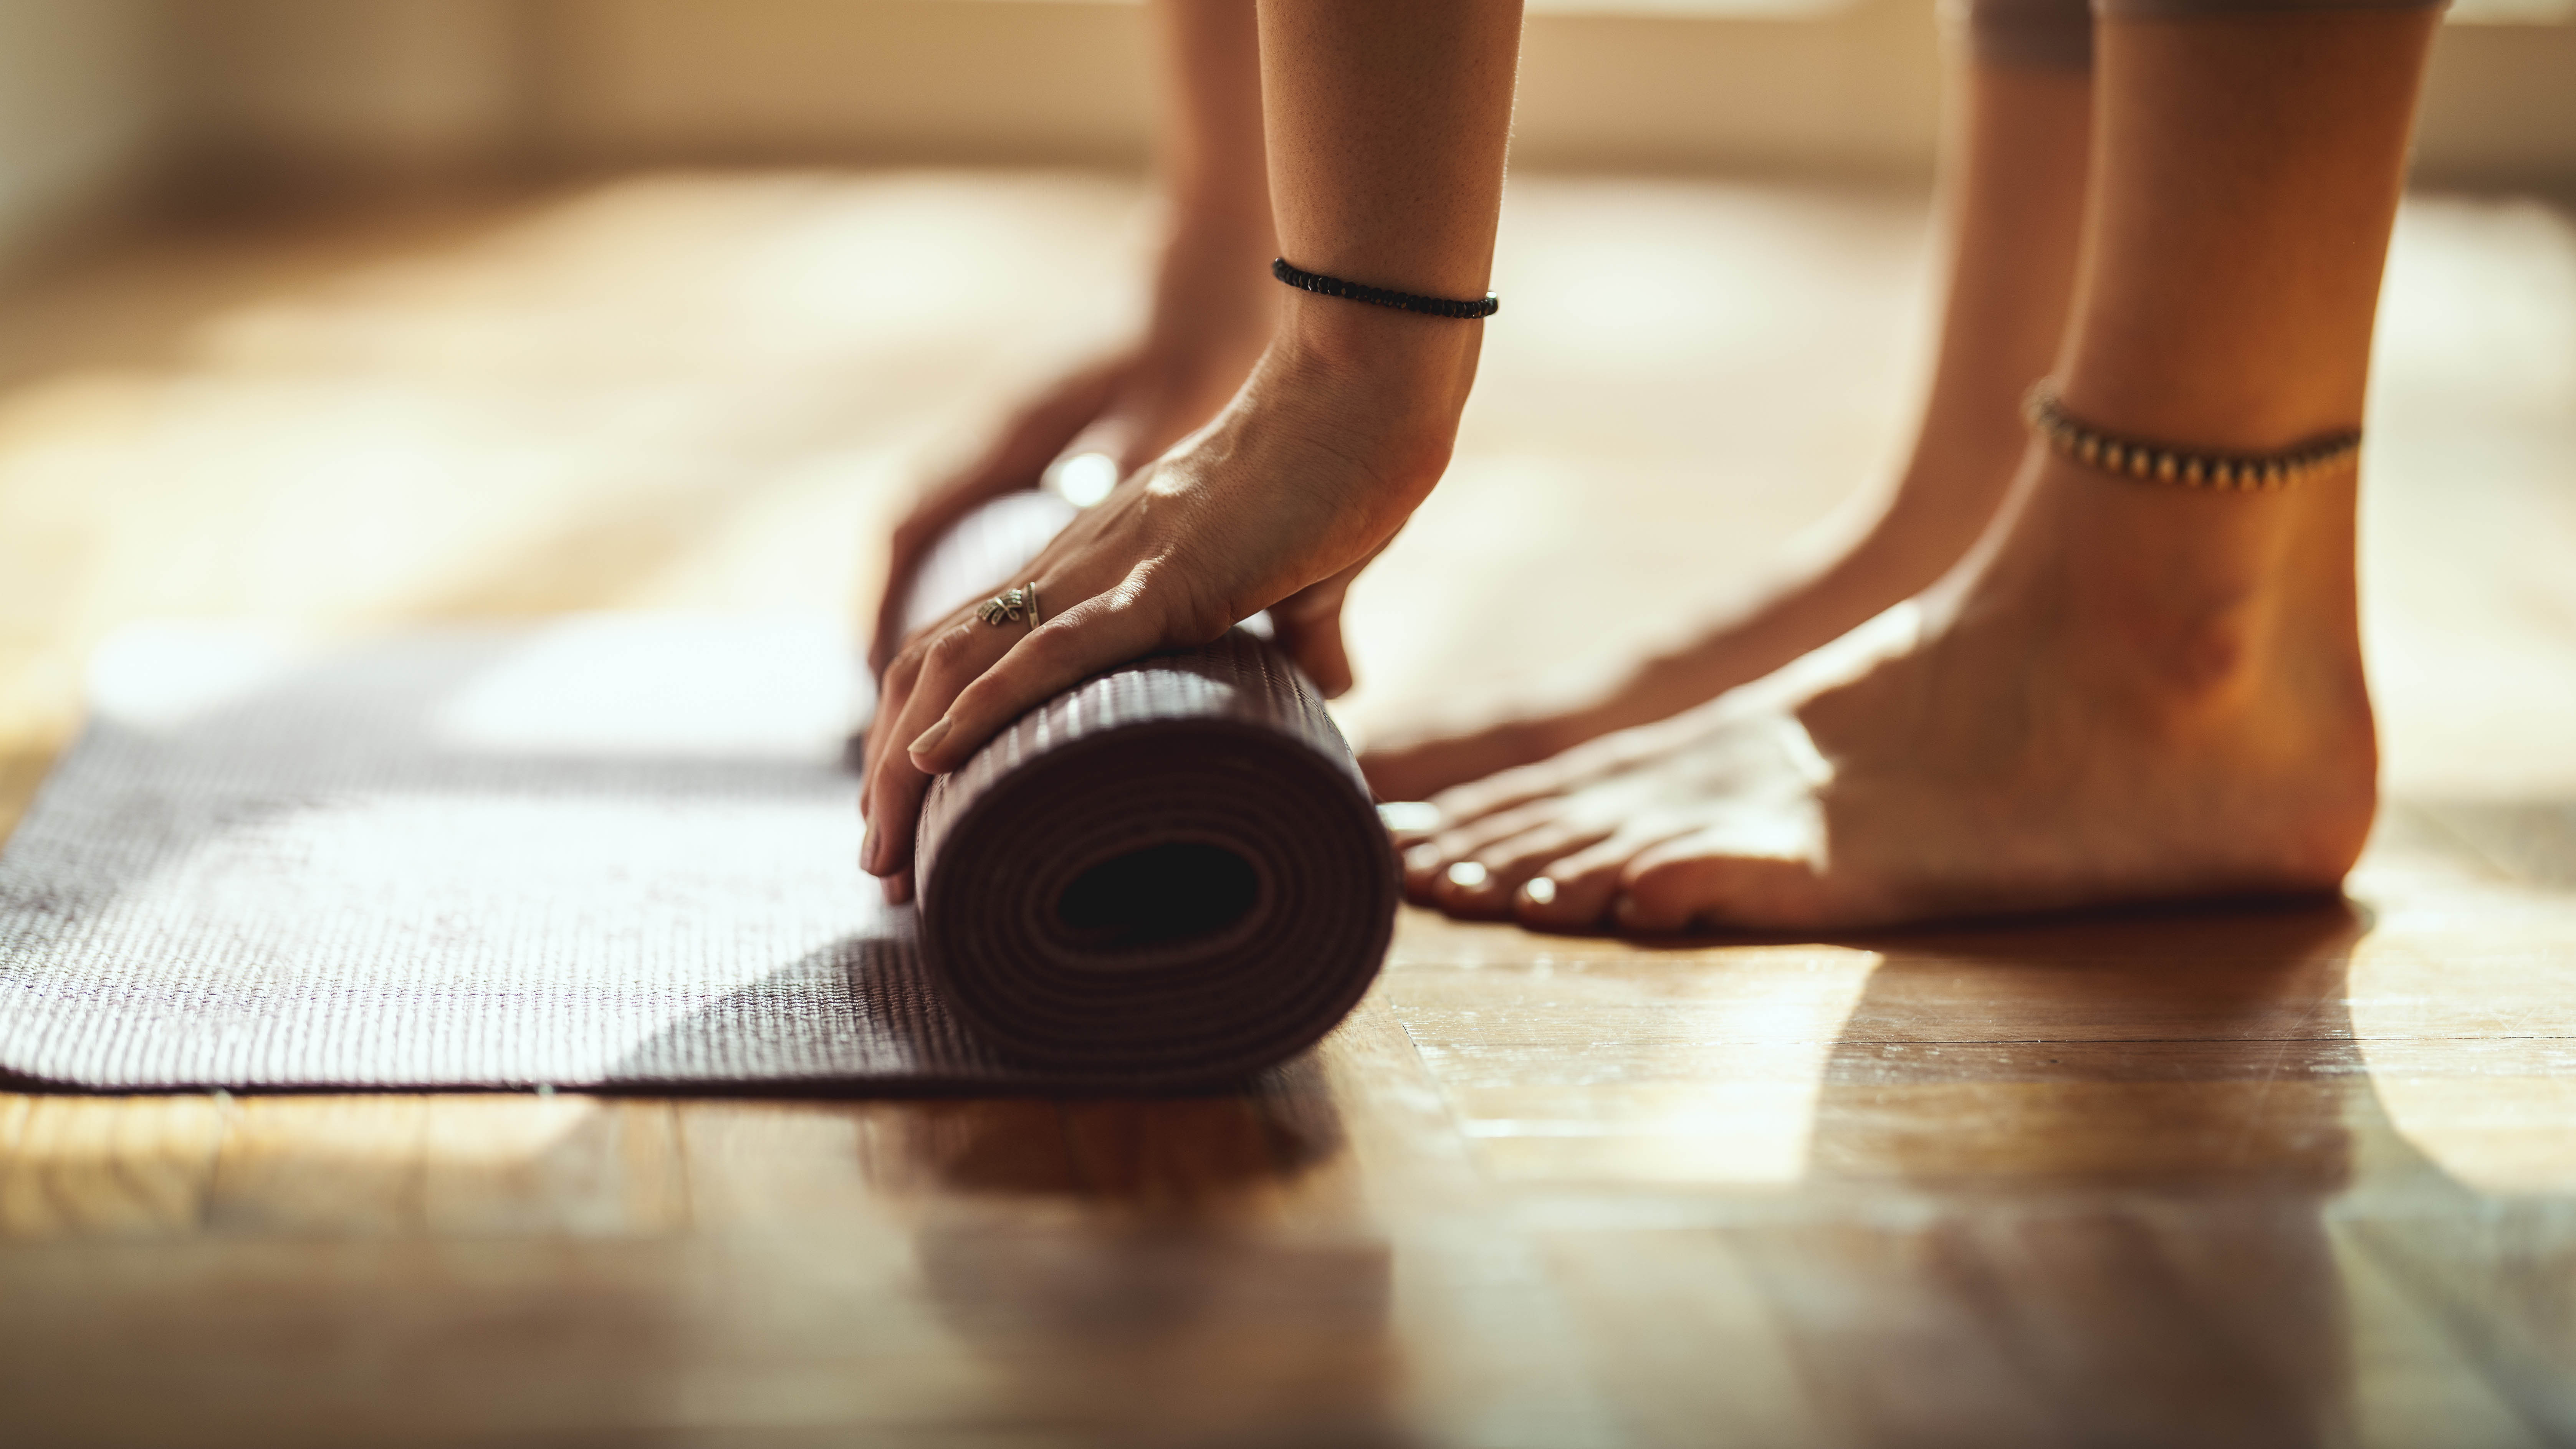 Koel doel Erge, ernstige How to clean a yoga mat and disinfect it | Tom's Guide